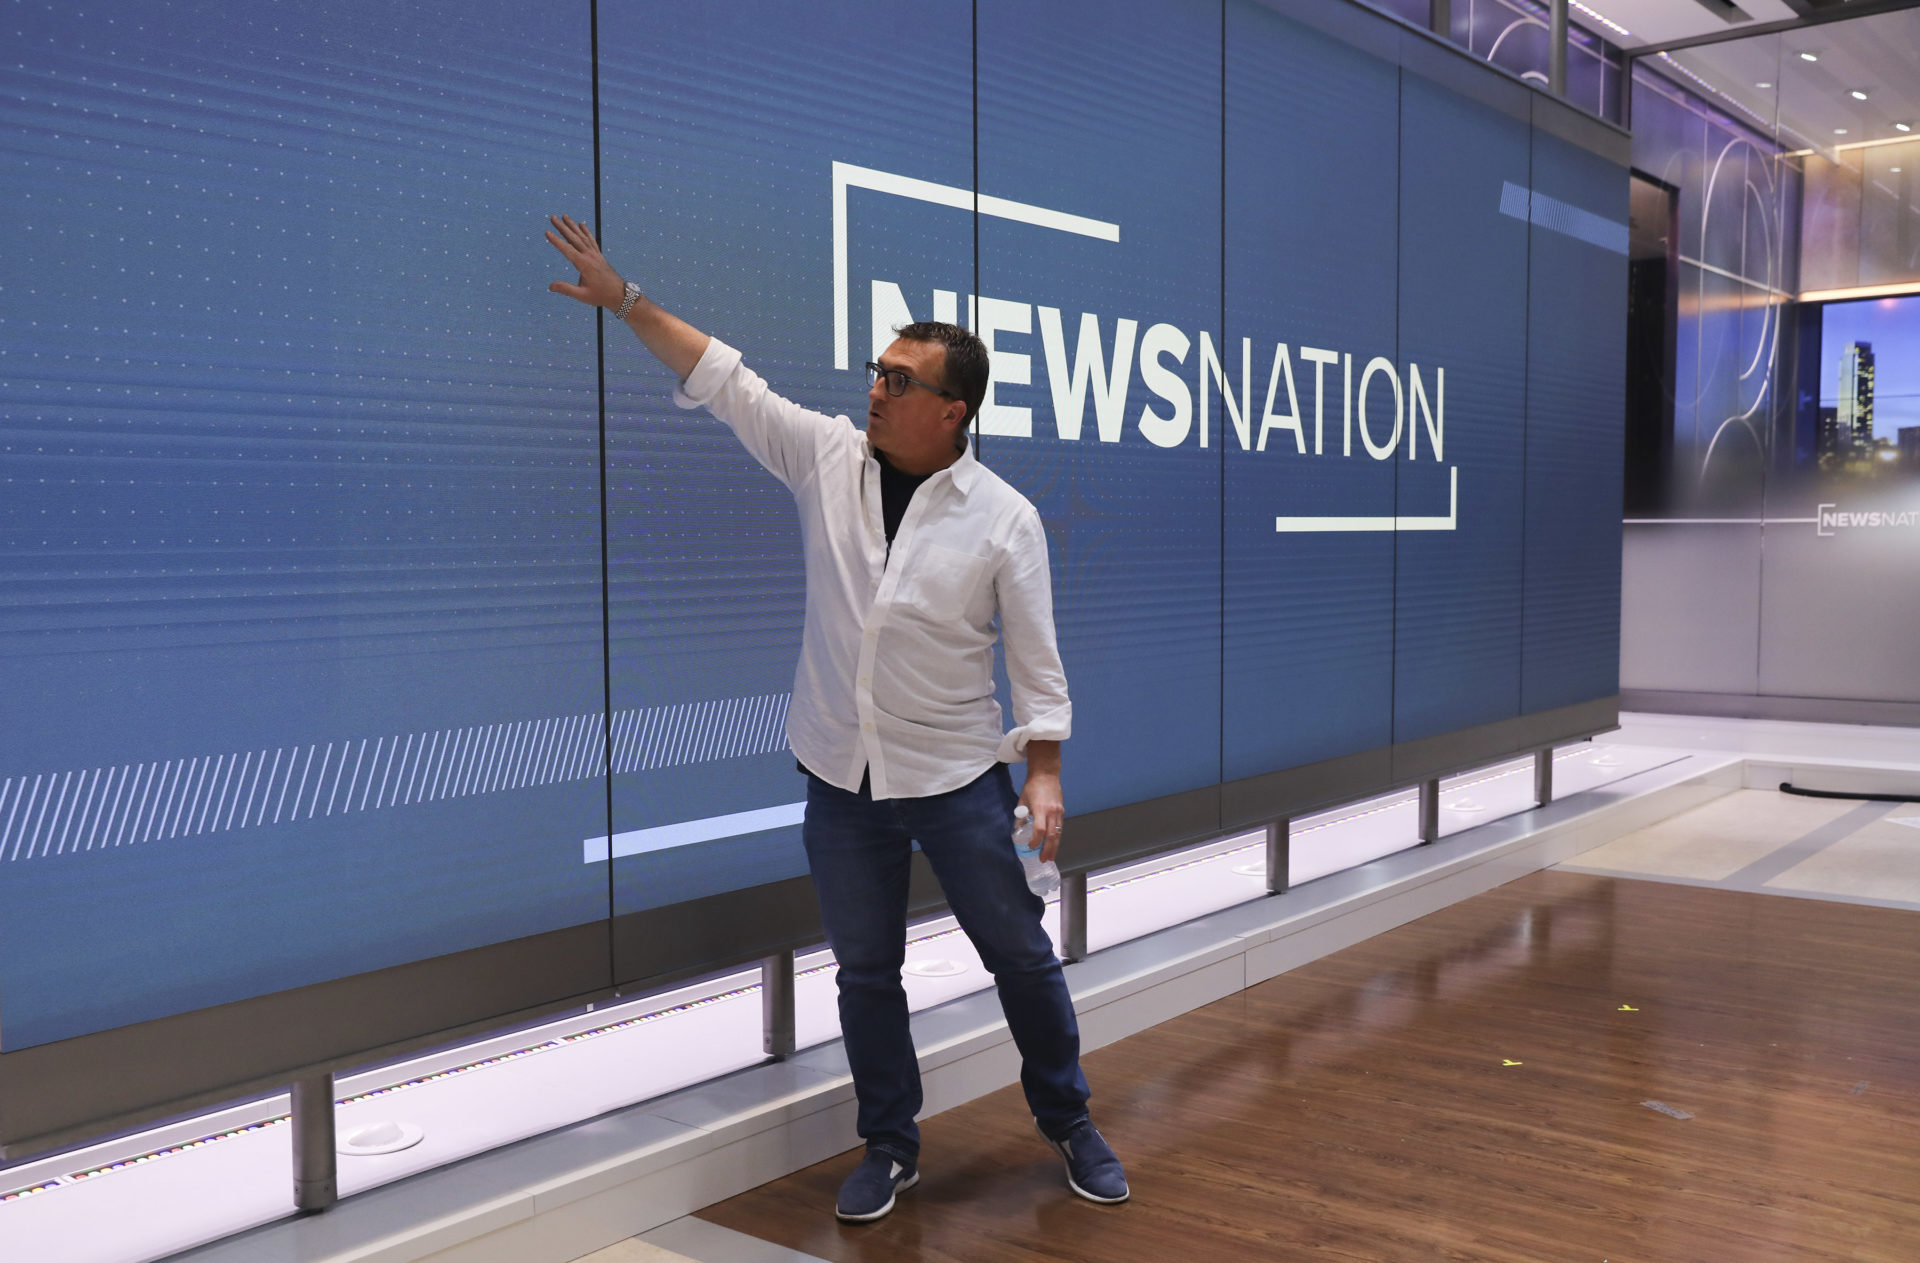 WGN America's 'NewsNation' looks for viewers who want their news served up opinion-free